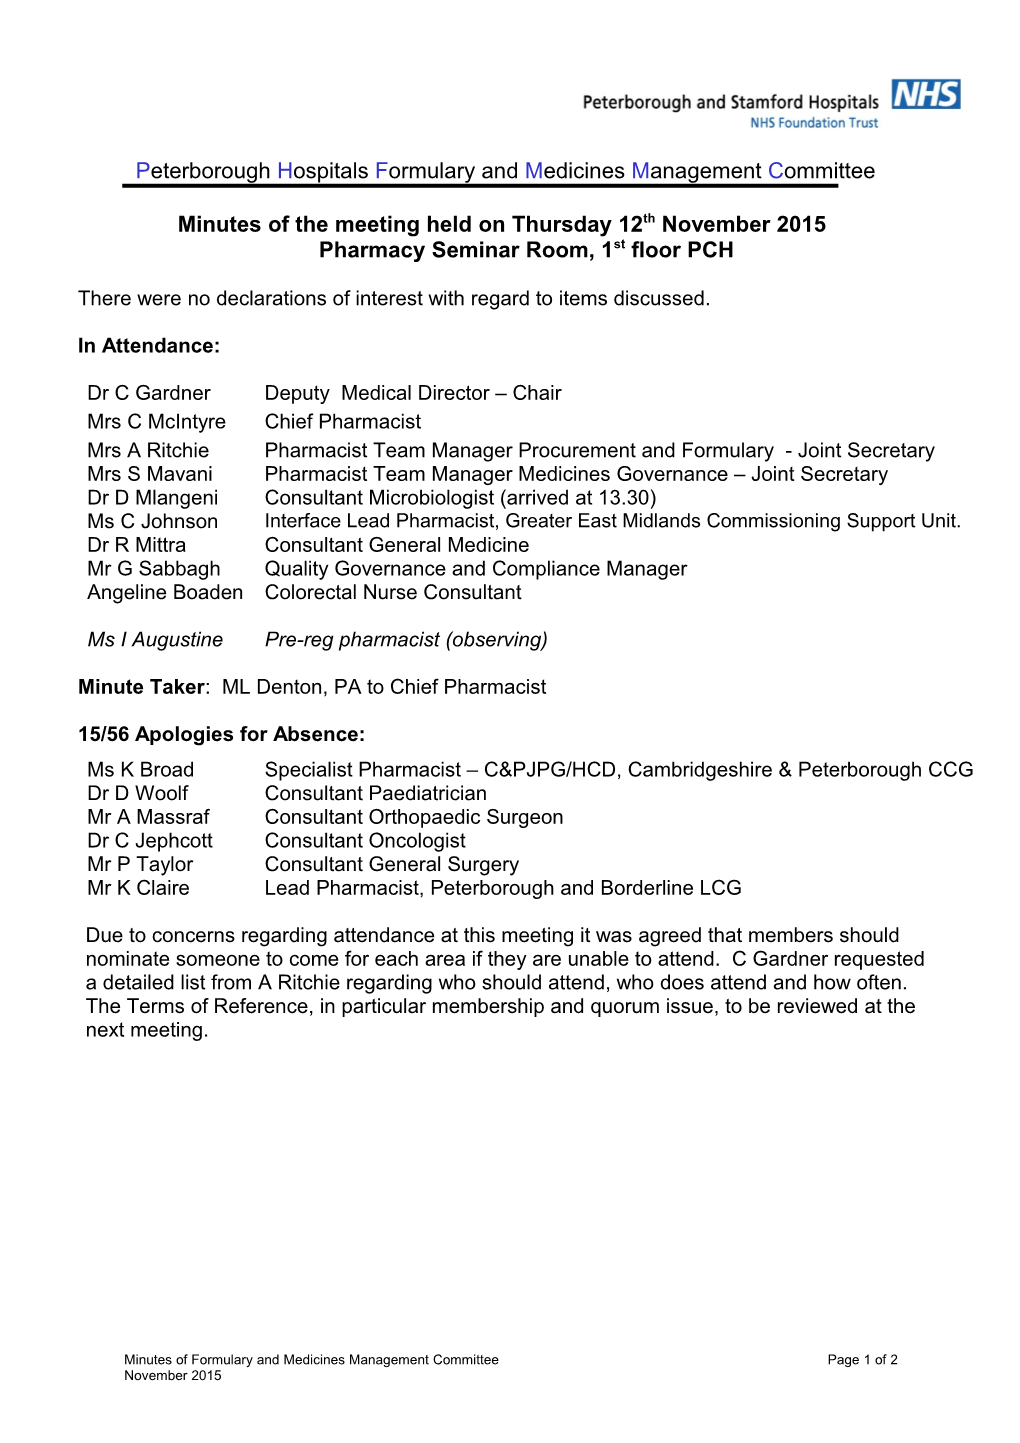 Minutes of the Meeting Held on Thursday 12Th November 2015